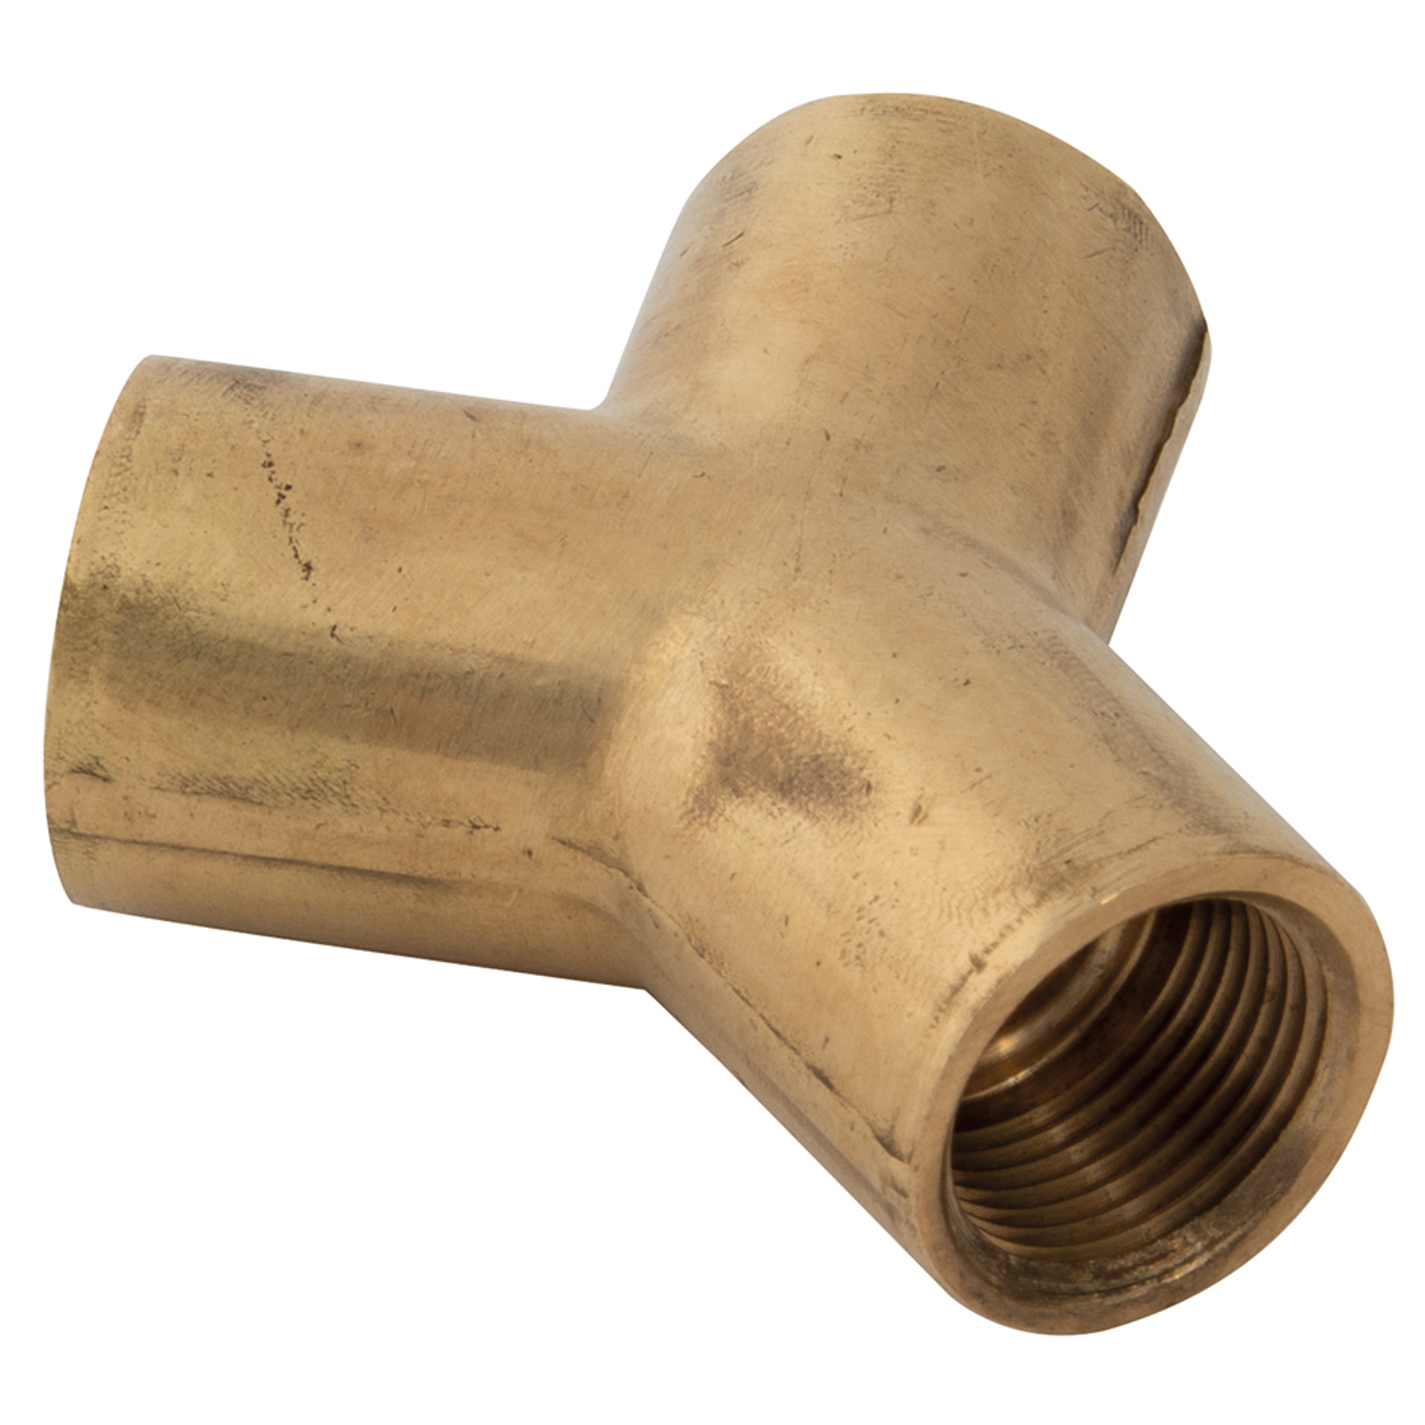 6mm Tube OD Metric Y Connector